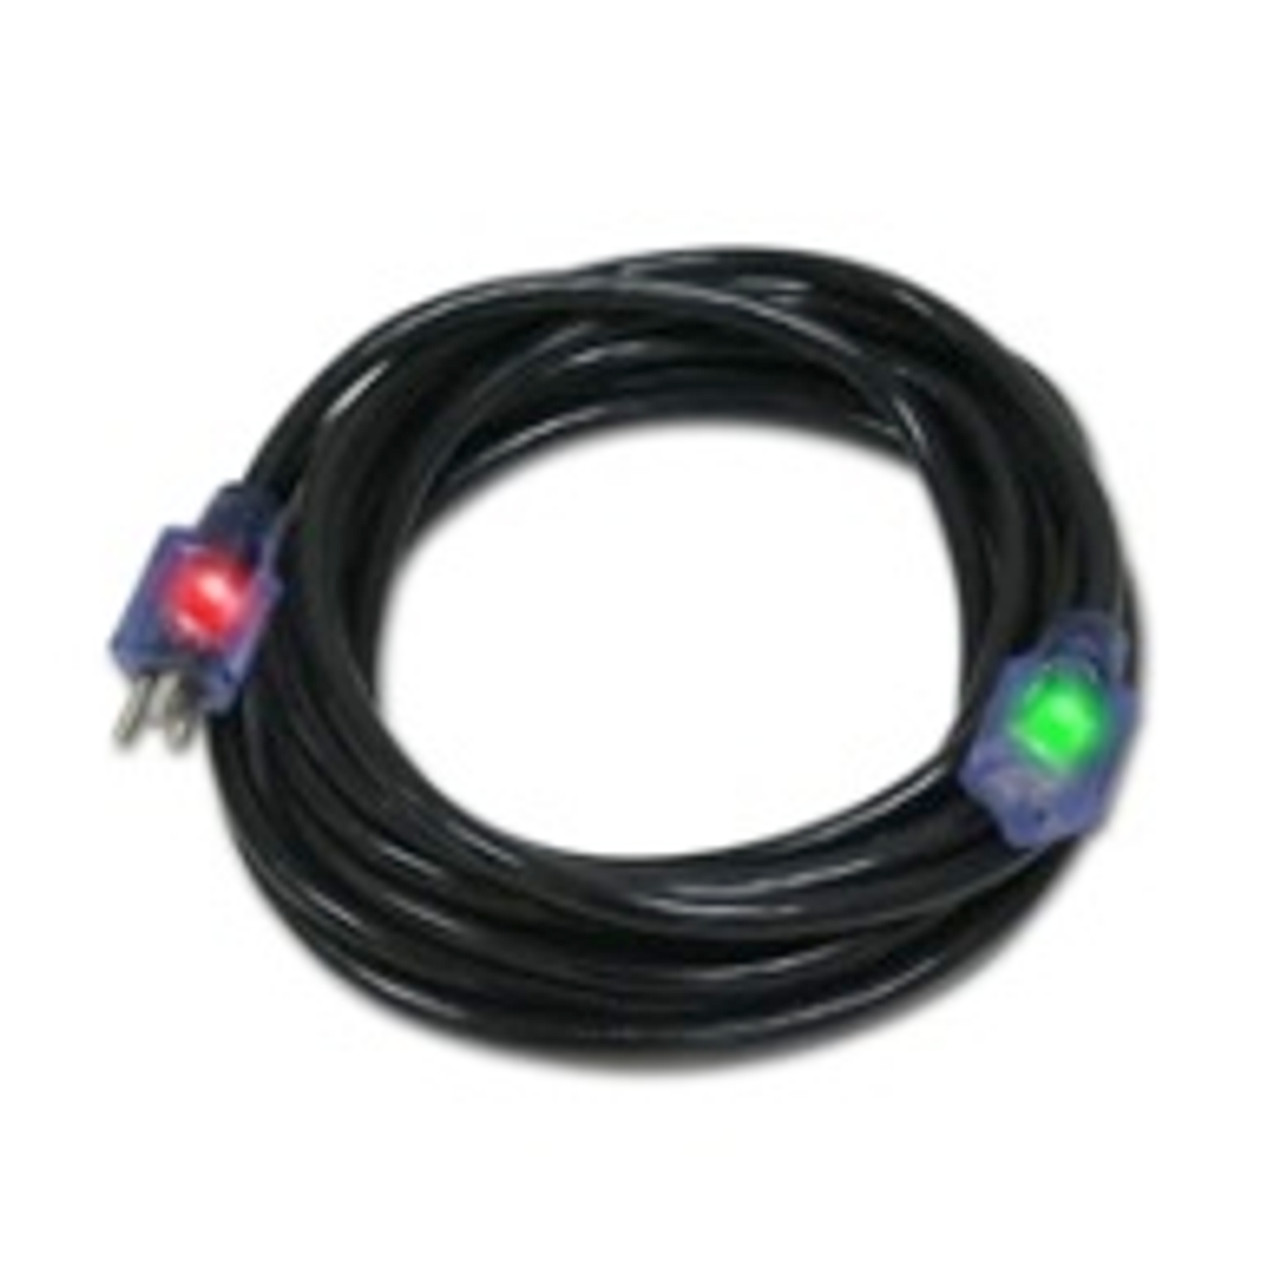 PRO GLO BLACK 50' 12/3 SJTW LIGHTED EXTENSION CORD WITH CGM - Safety Express